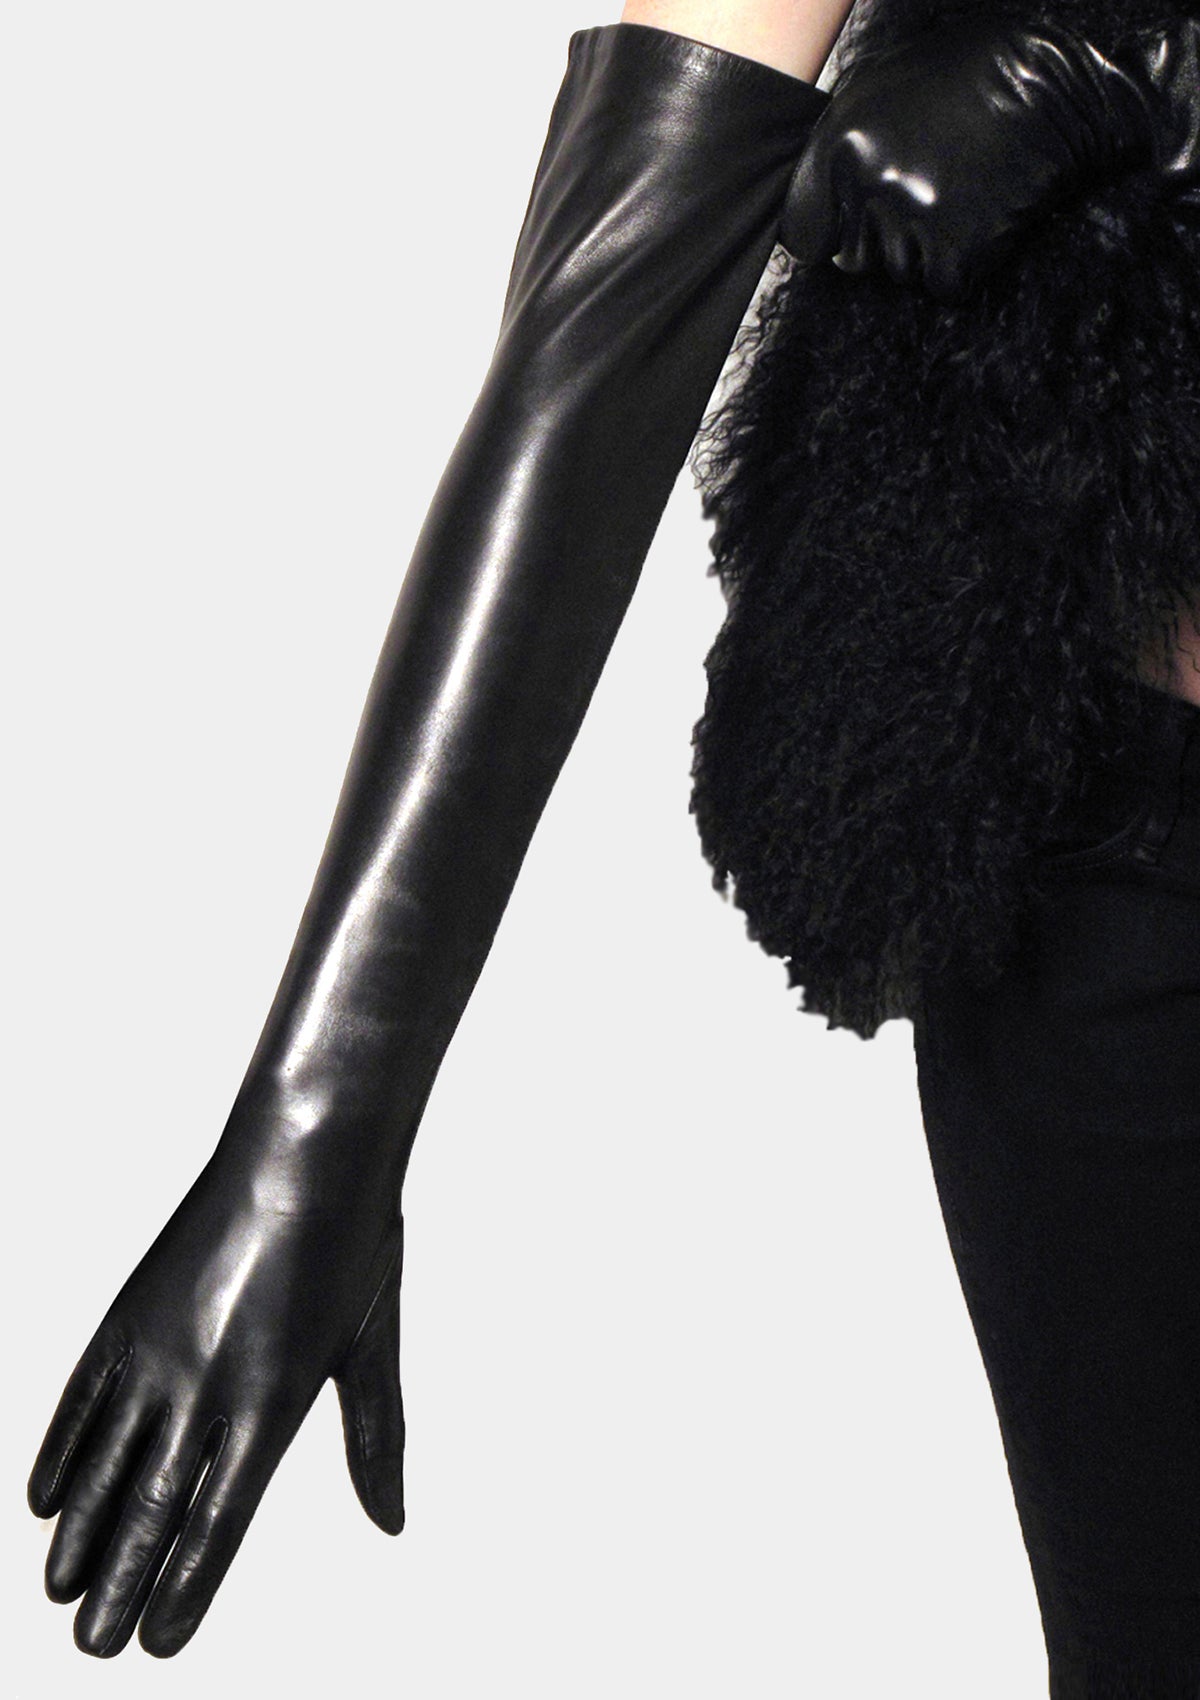 Extra long Opera length Leather Gloves